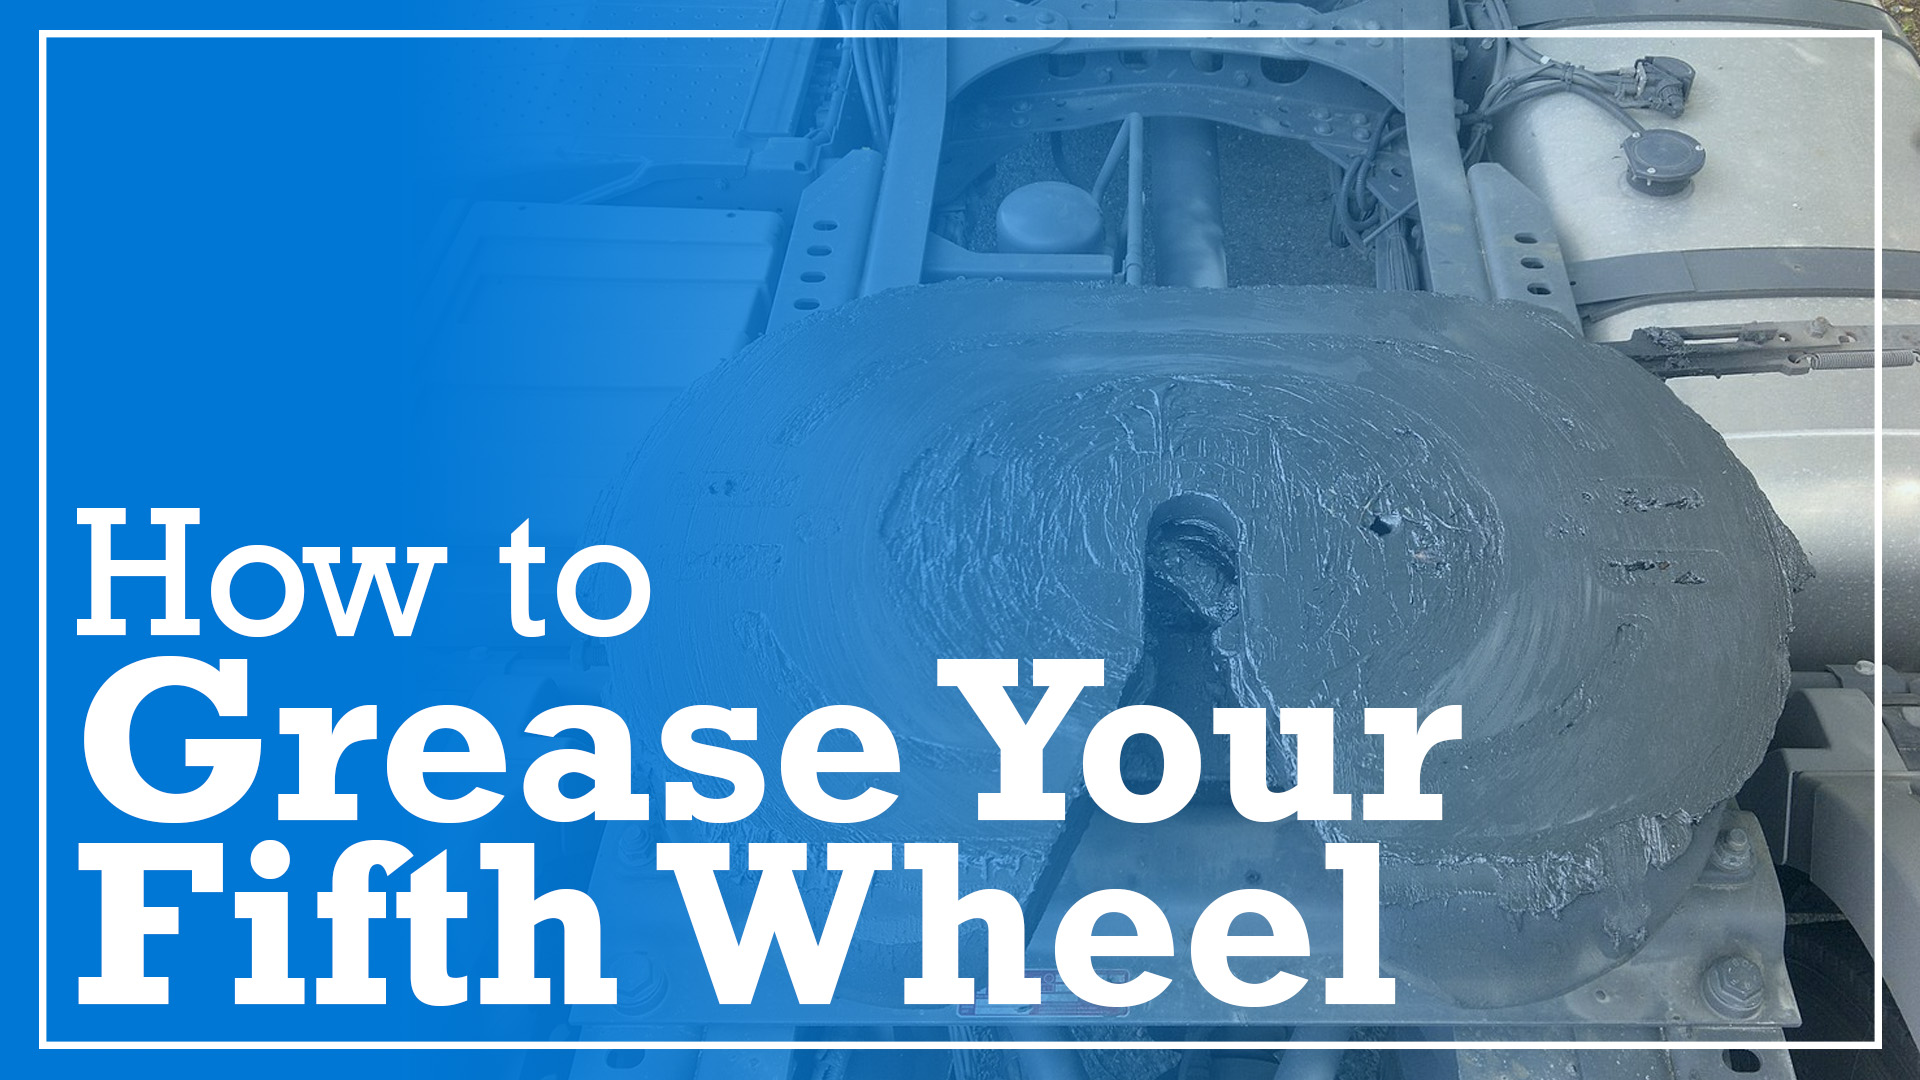 How to Grease Your Fifth Wheel